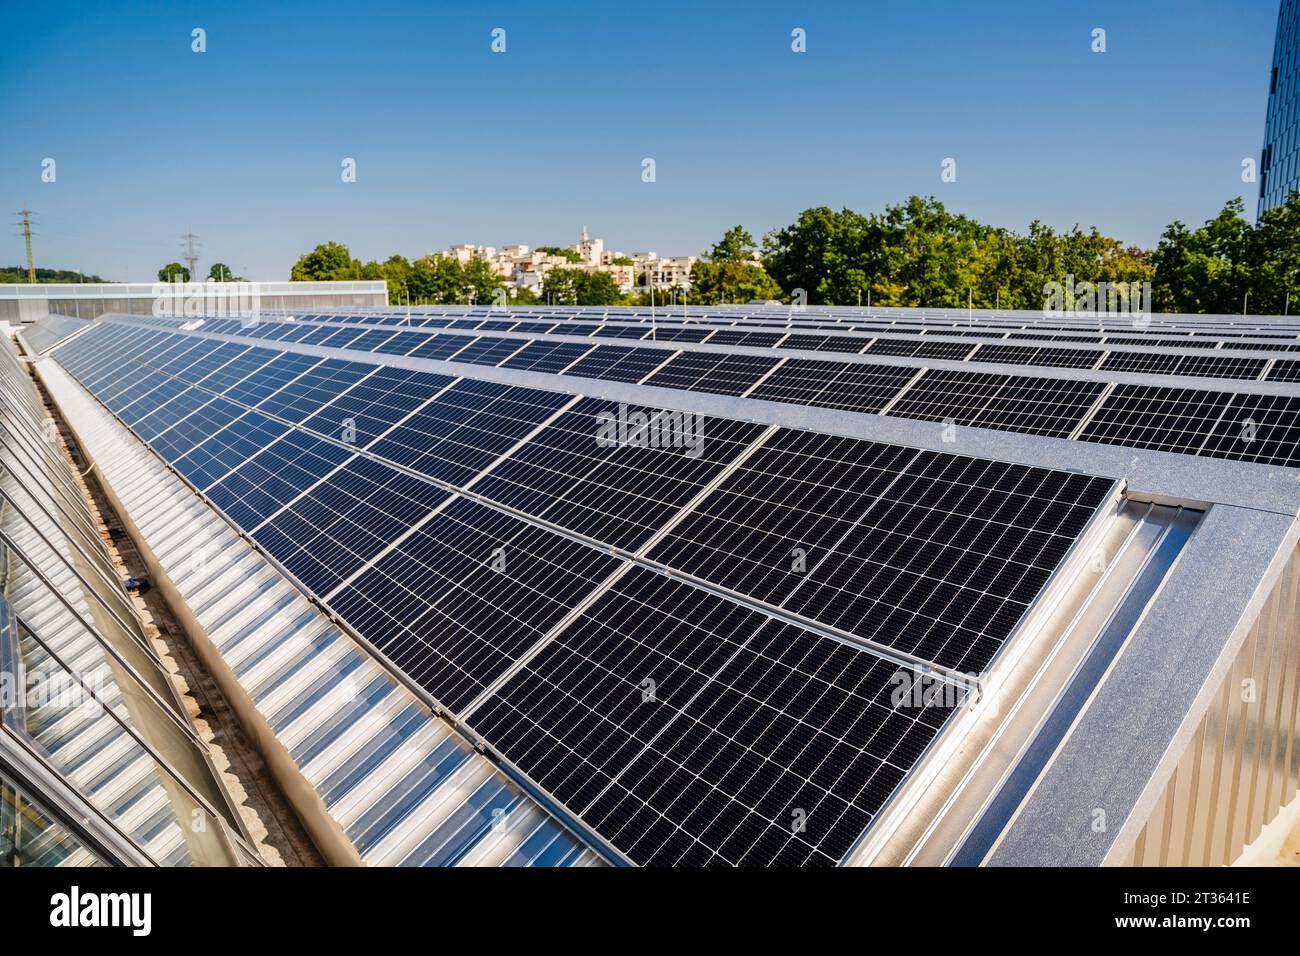 Solar panels on the roof of a building under blue sky Stock Photo